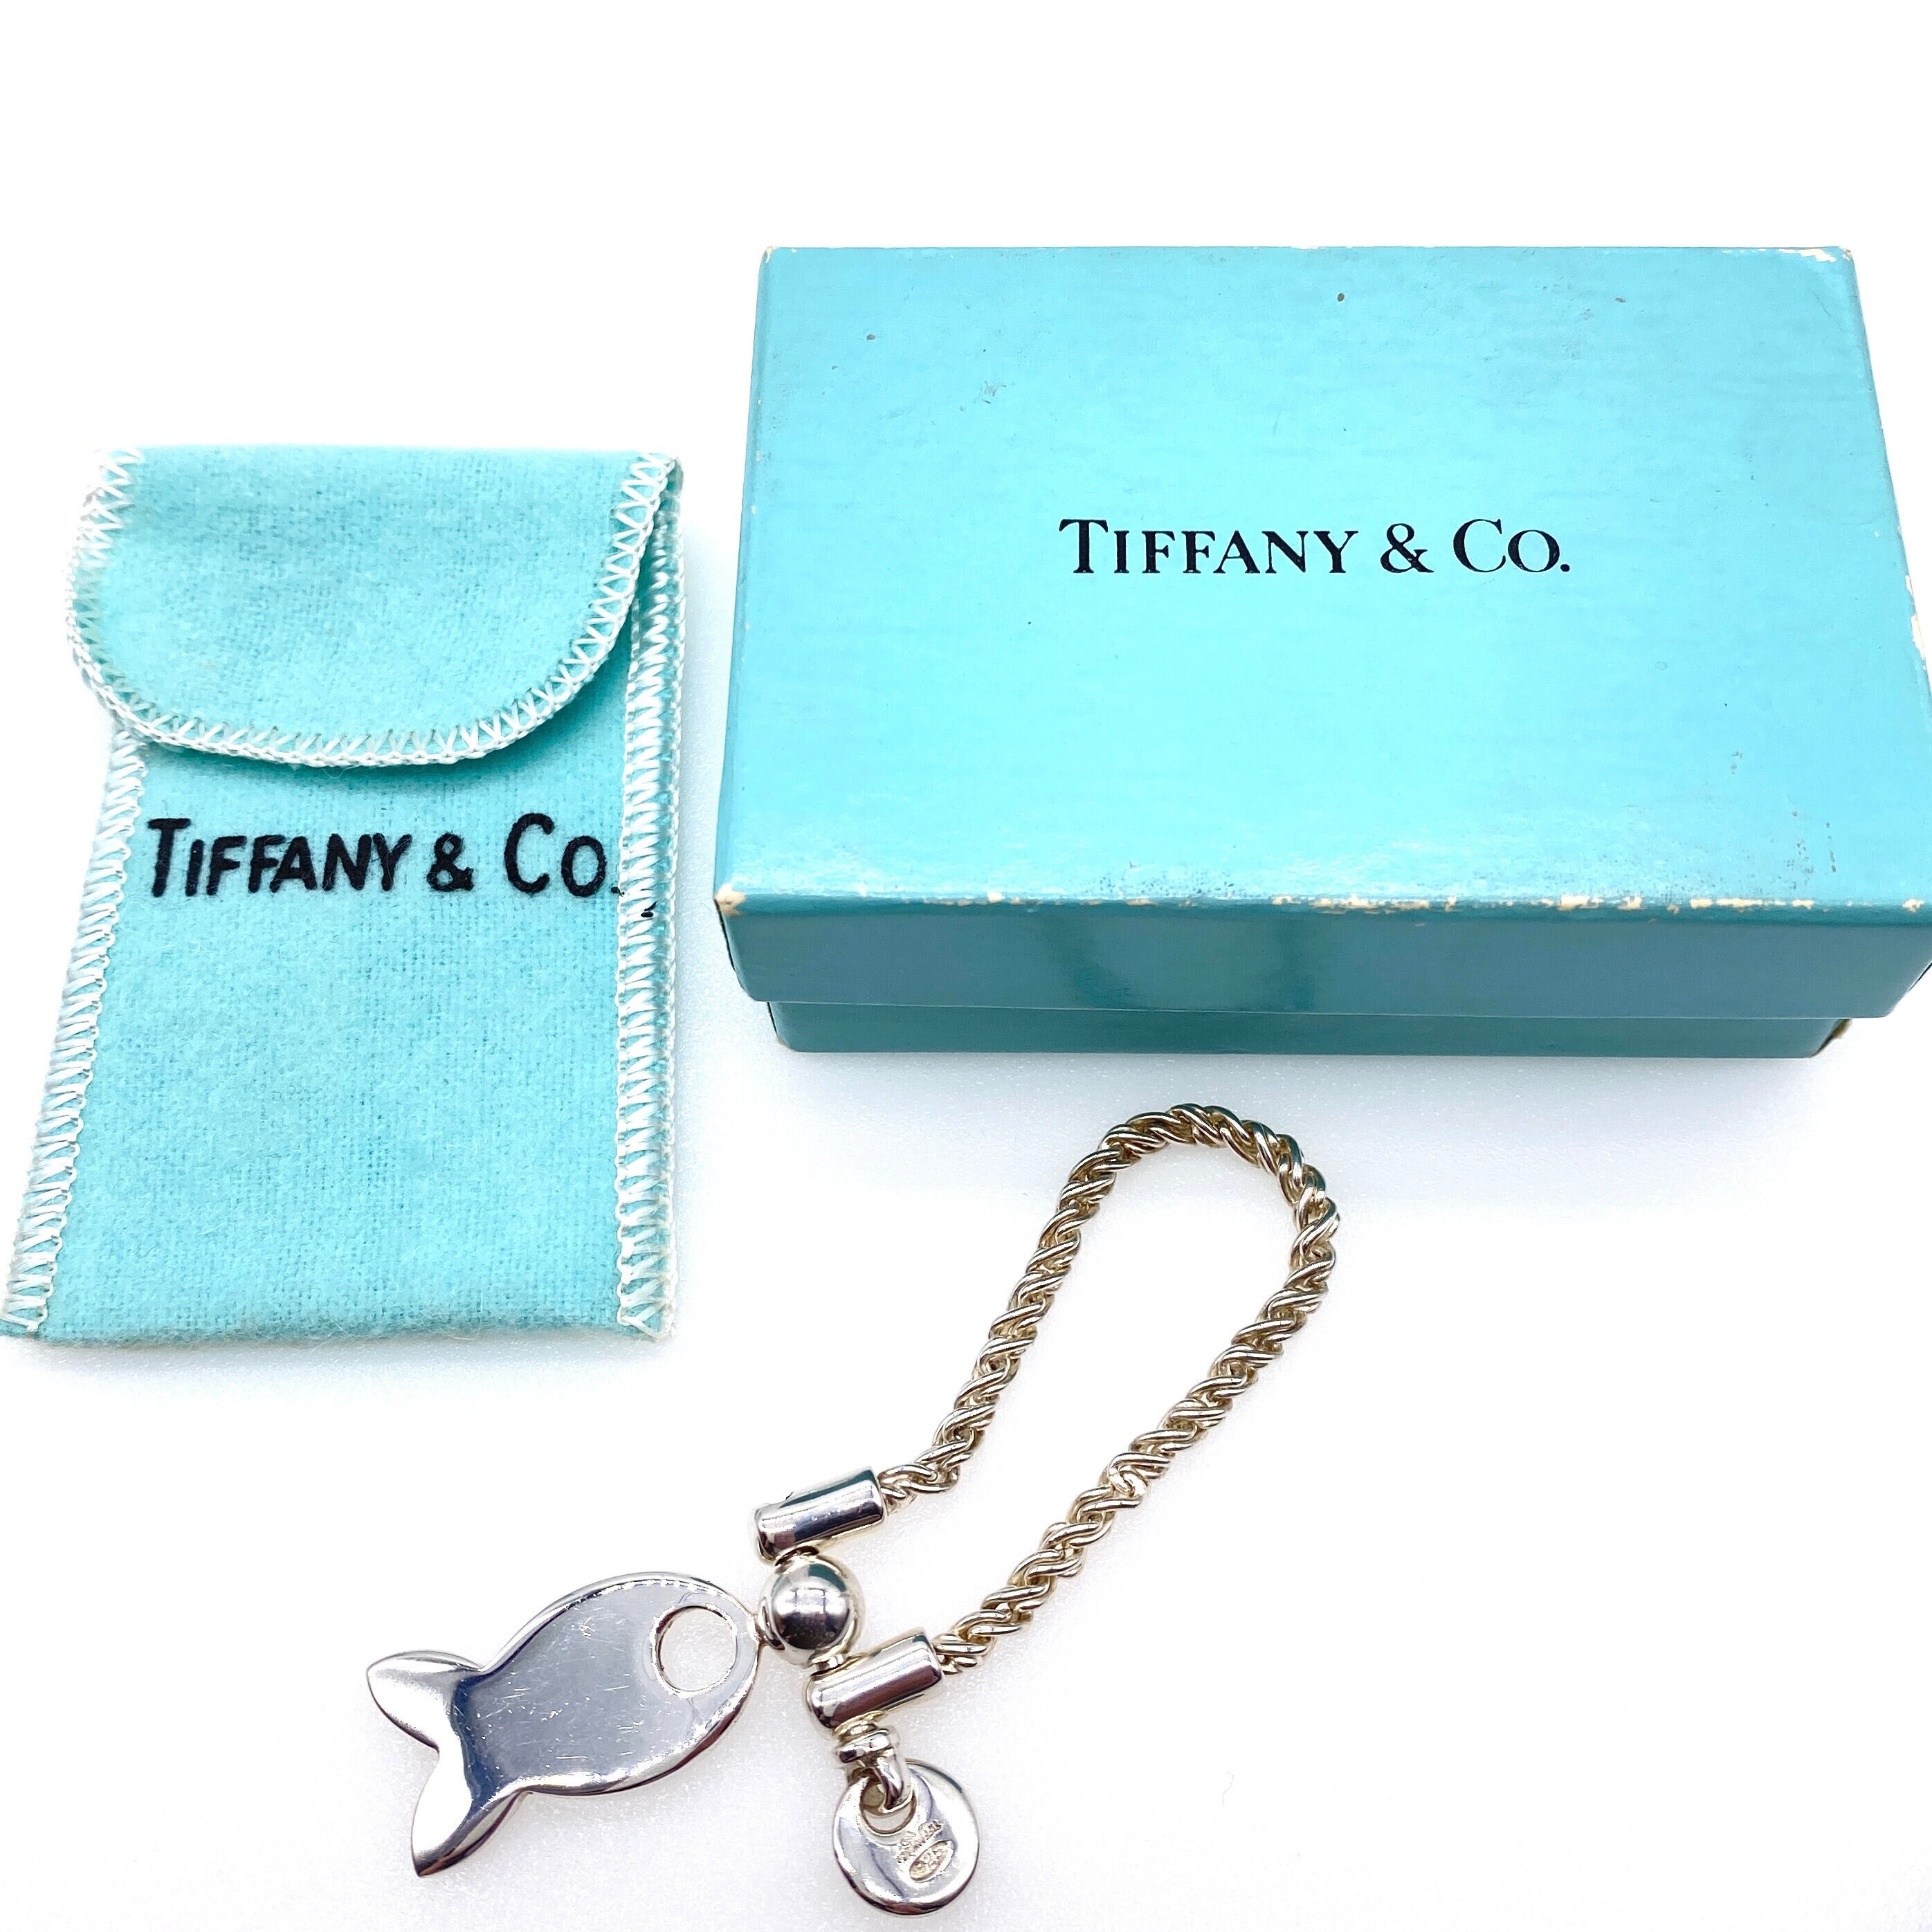 Tiffany Key Ring for sale | Only 2 left at -75%